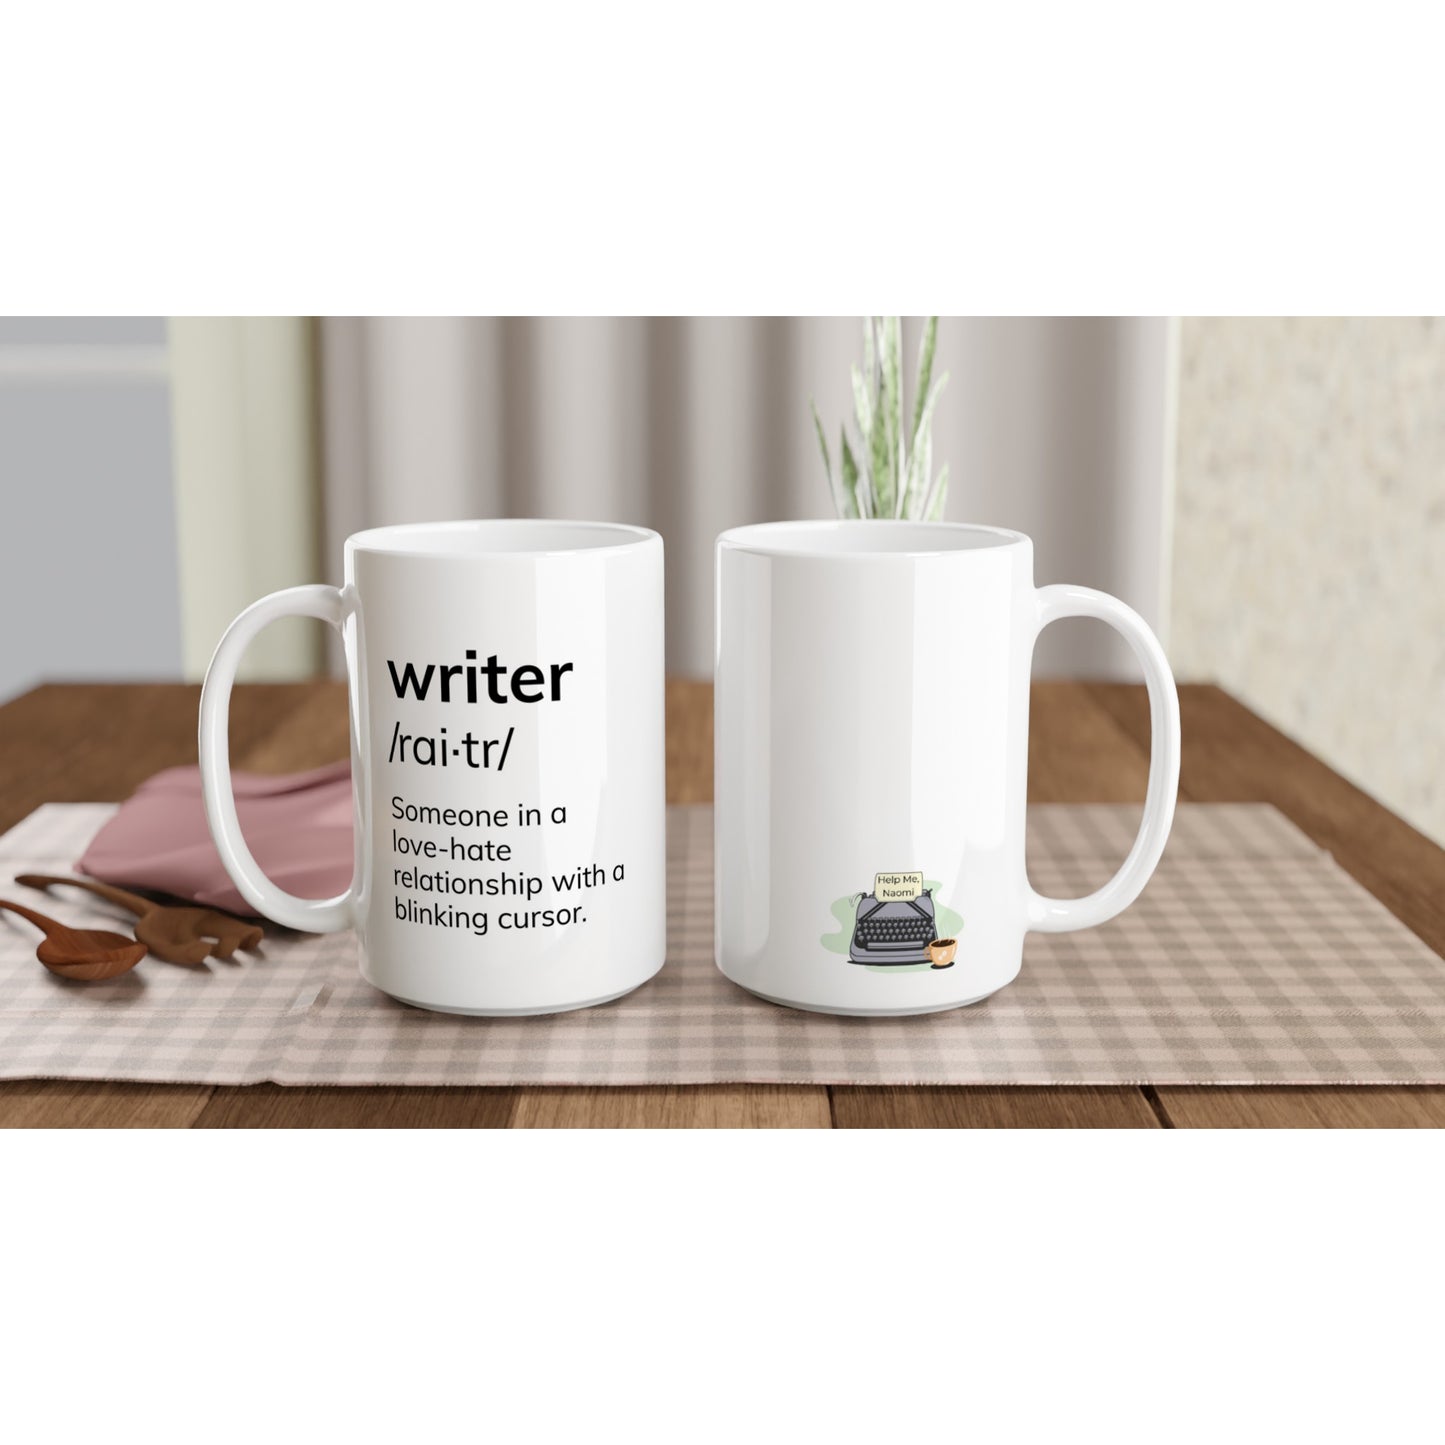 Writing-Related Coffee Mug // Writer: Someone in a love-hate relationship with a blinking cursor